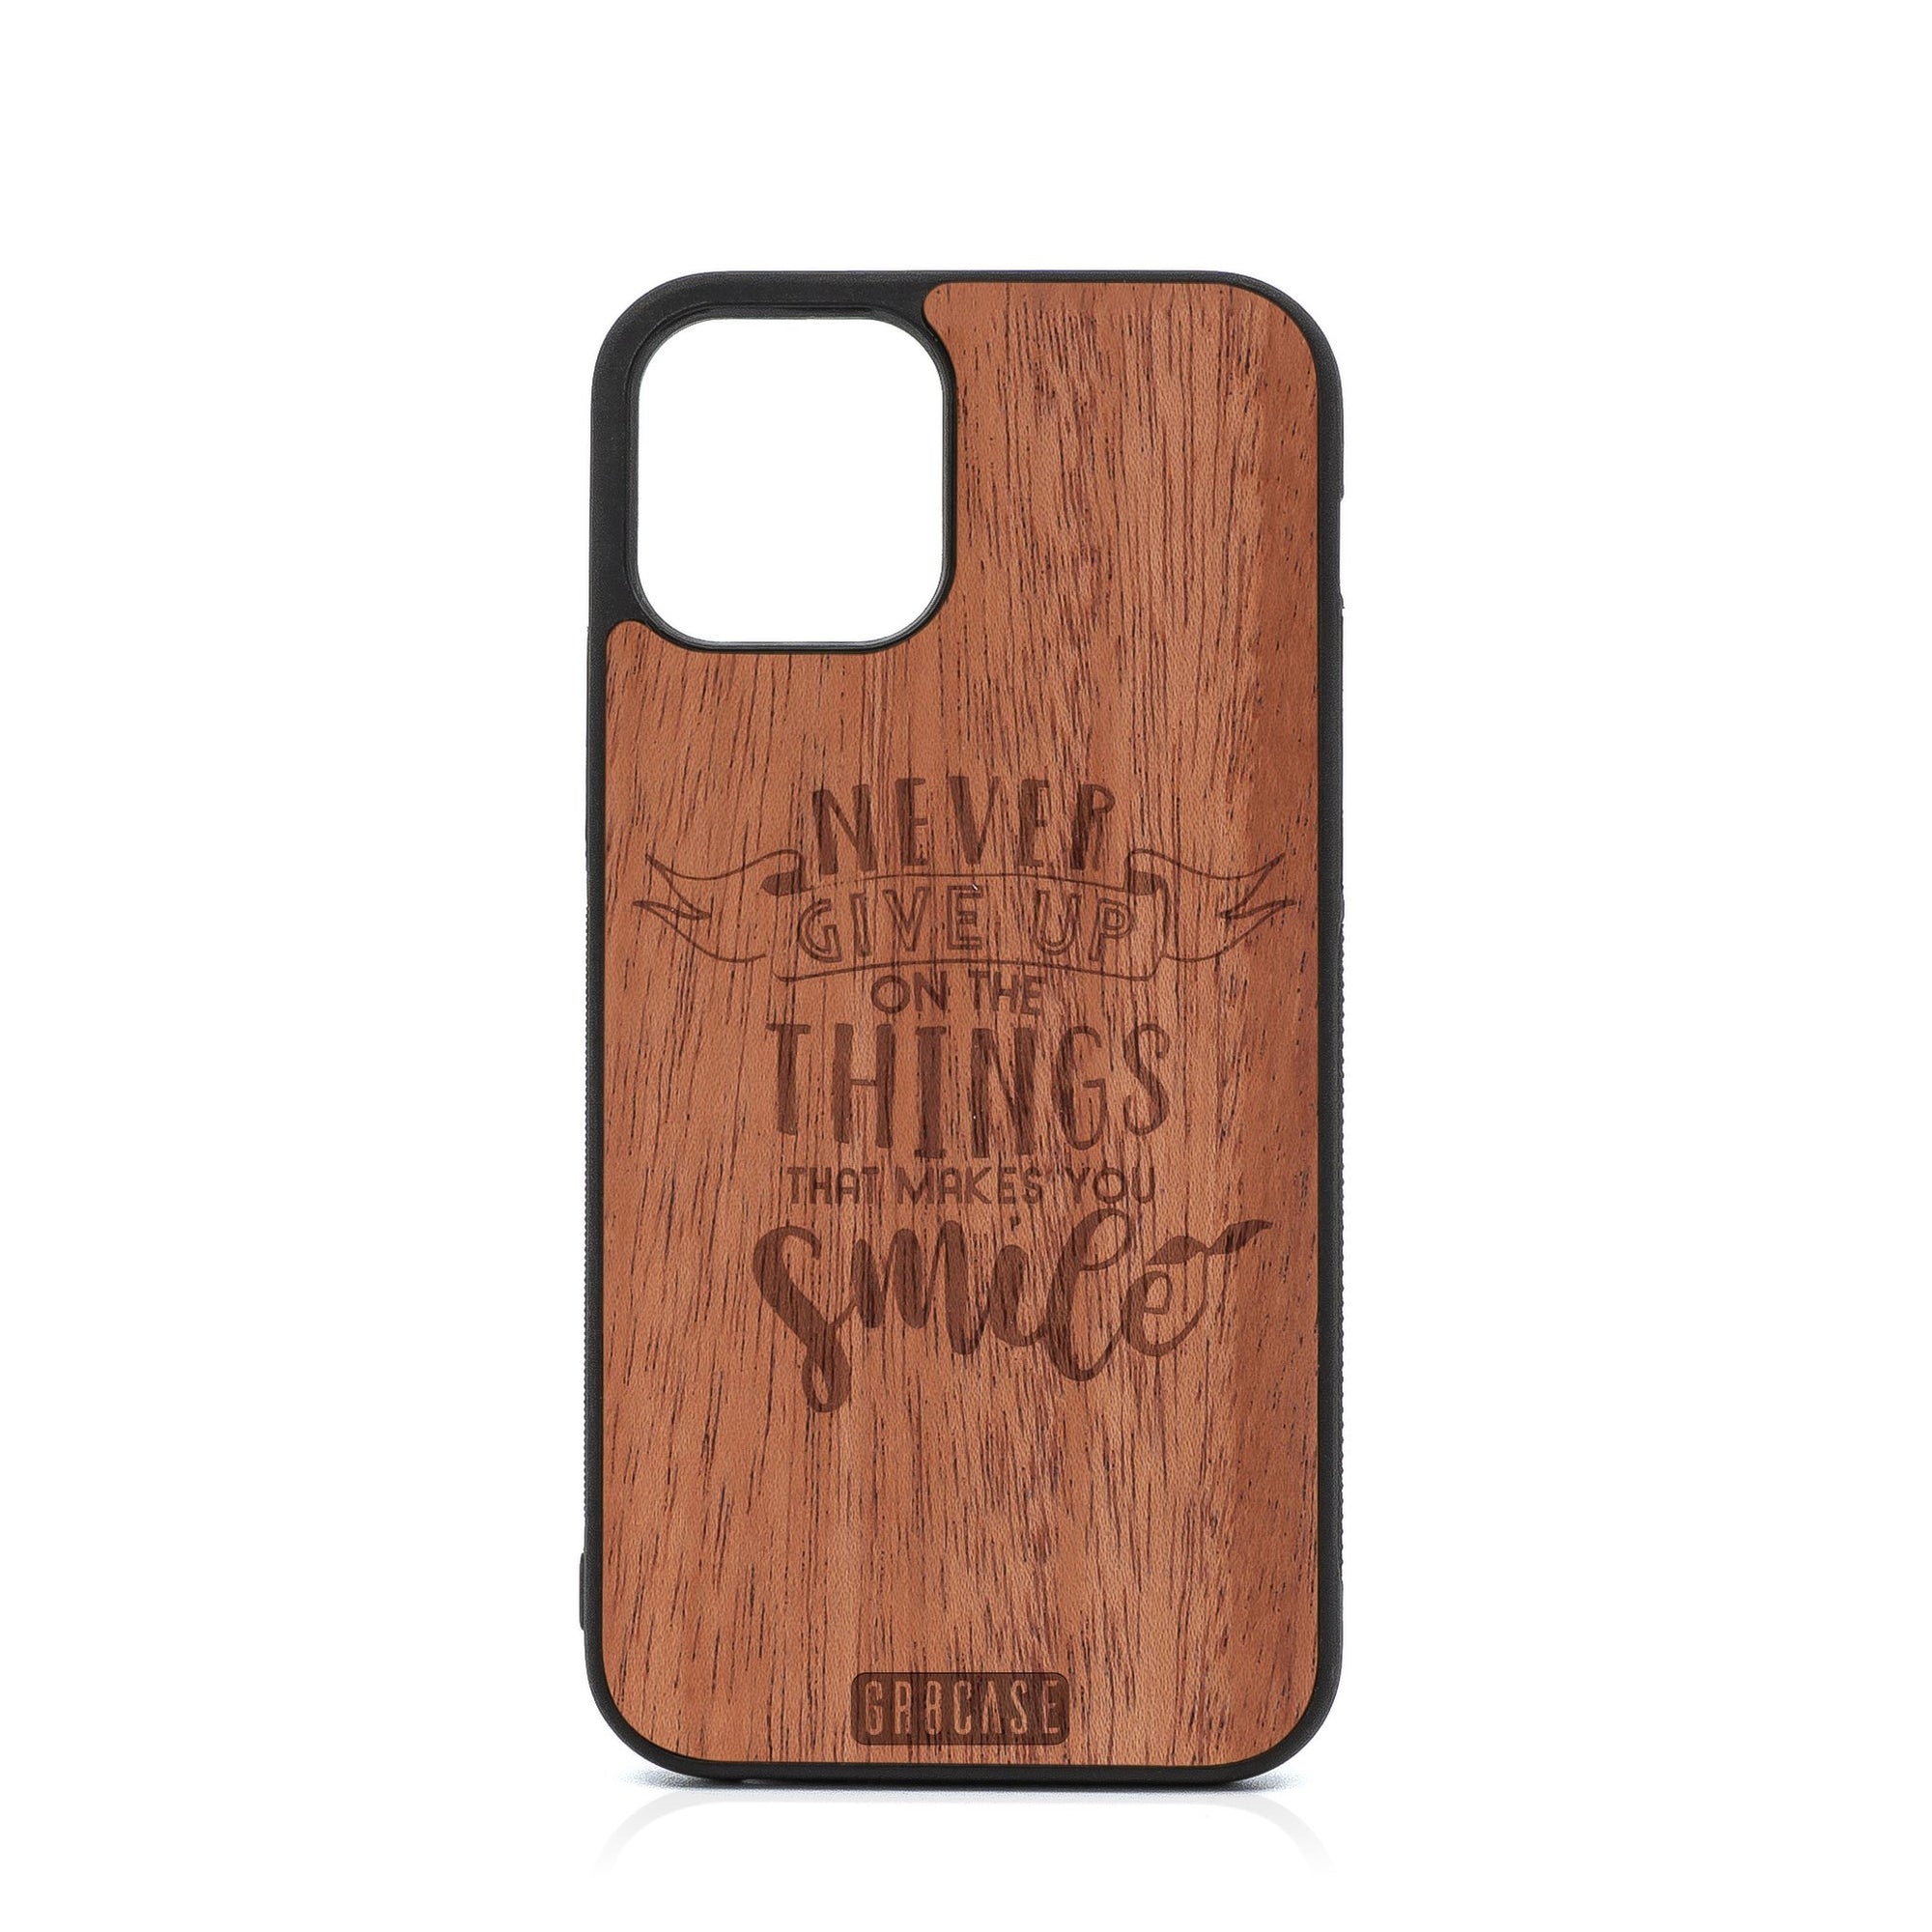 Never Give Up On The Things That Makes You Smile Design Wood Case For iPhone 12 Pro